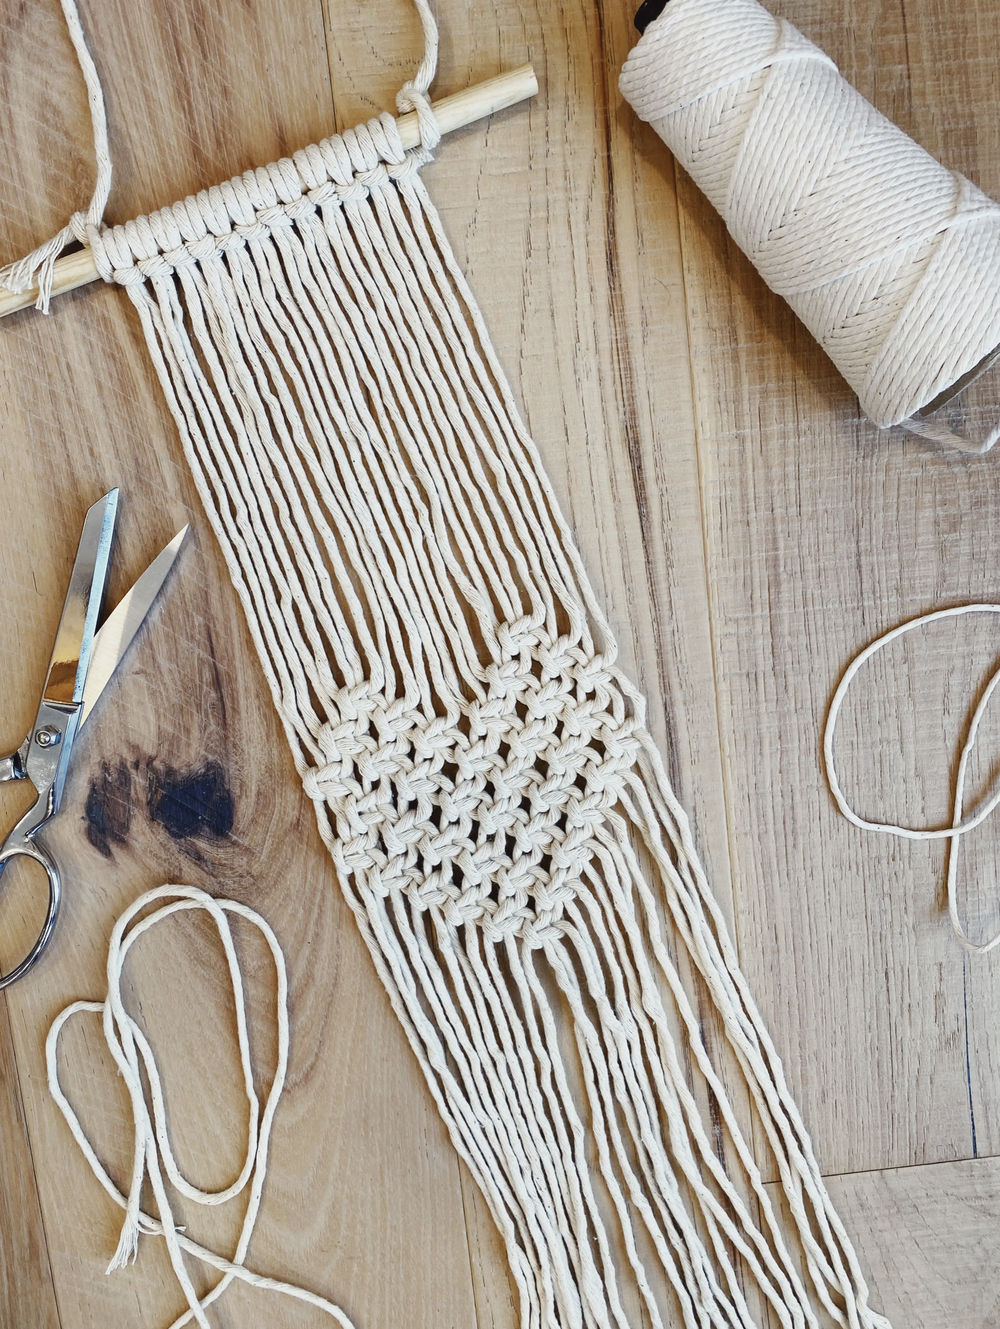 Macrame Kit - Advanced - In My Heart — Click and Craft